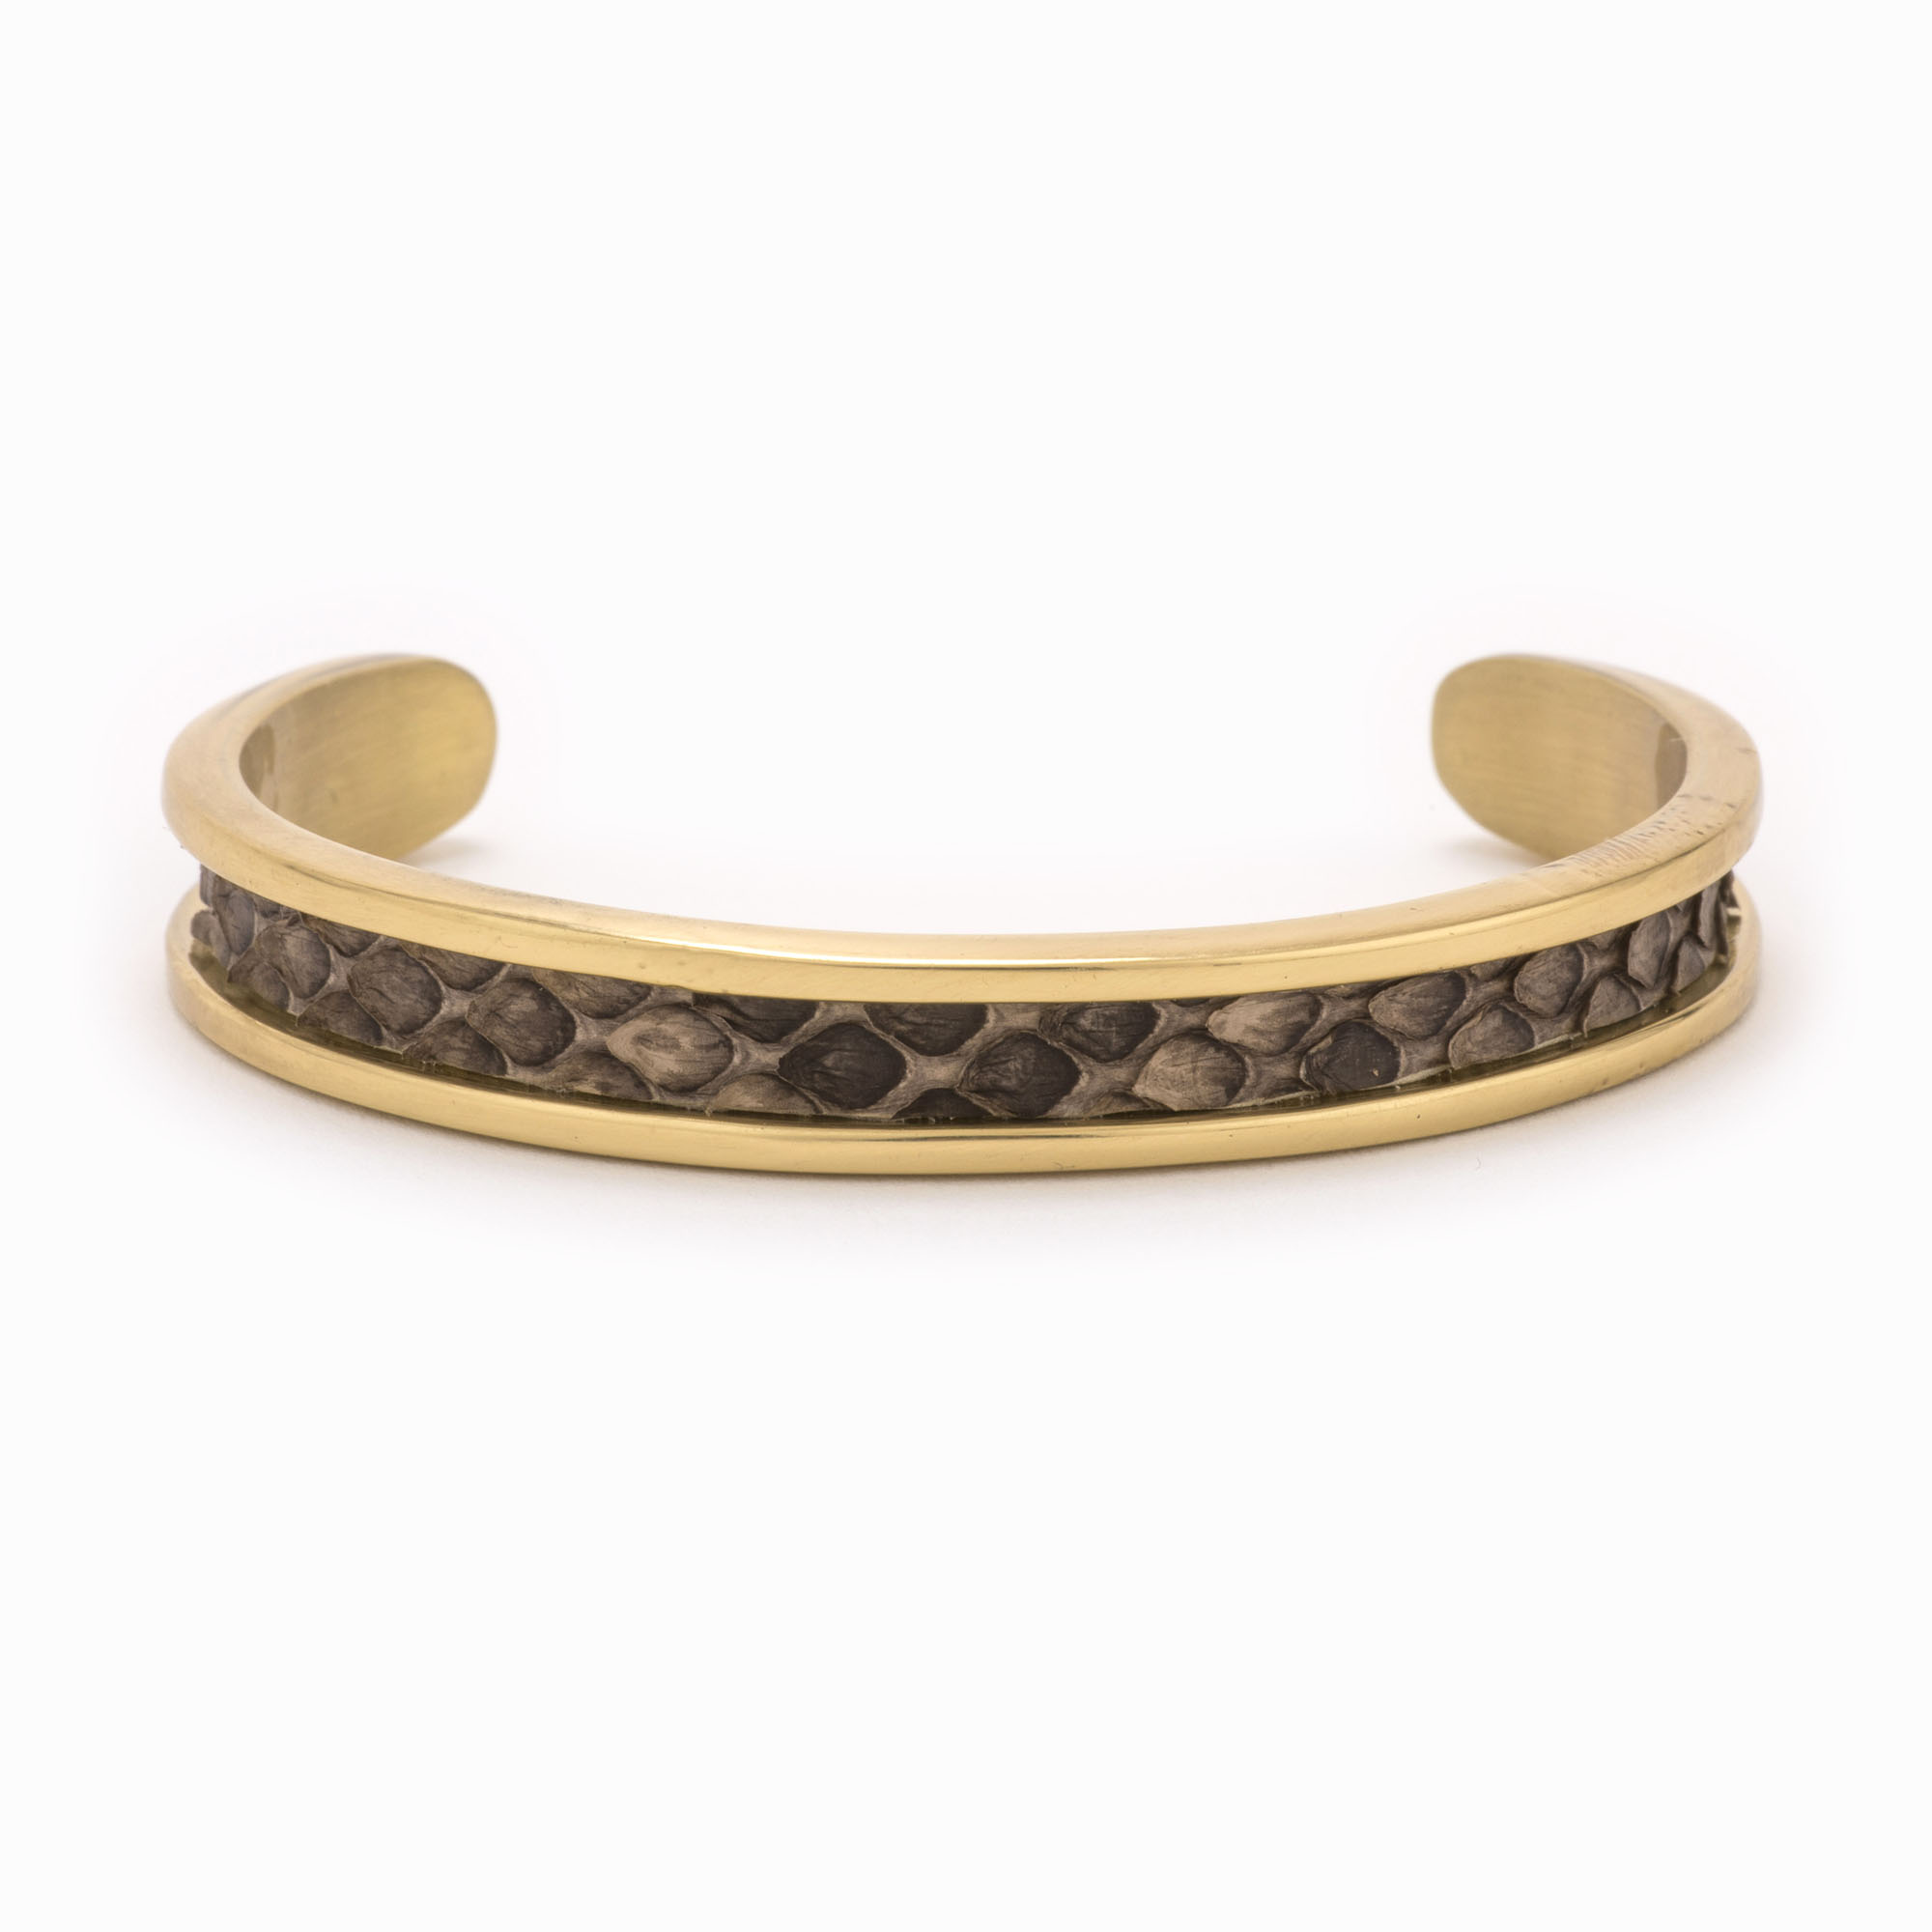 Featured image for “Small Grey & Brown Gold Cuff”